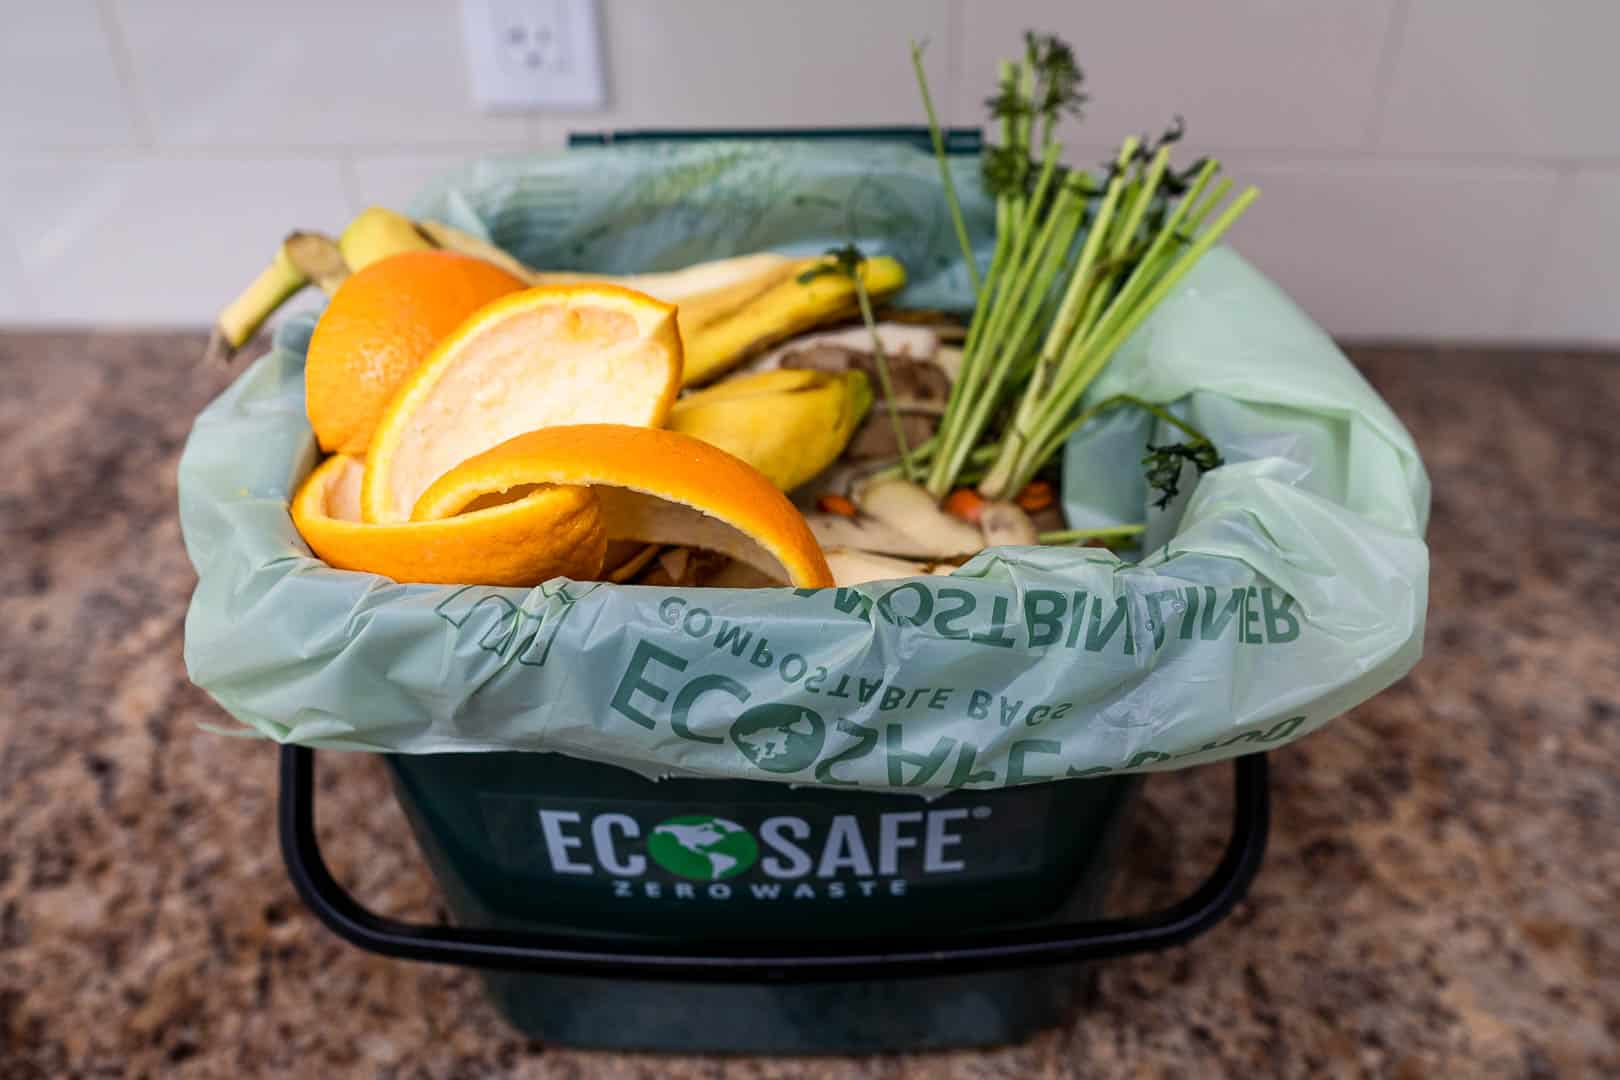 Food waste in compostable bag and bin on kitchen countertop